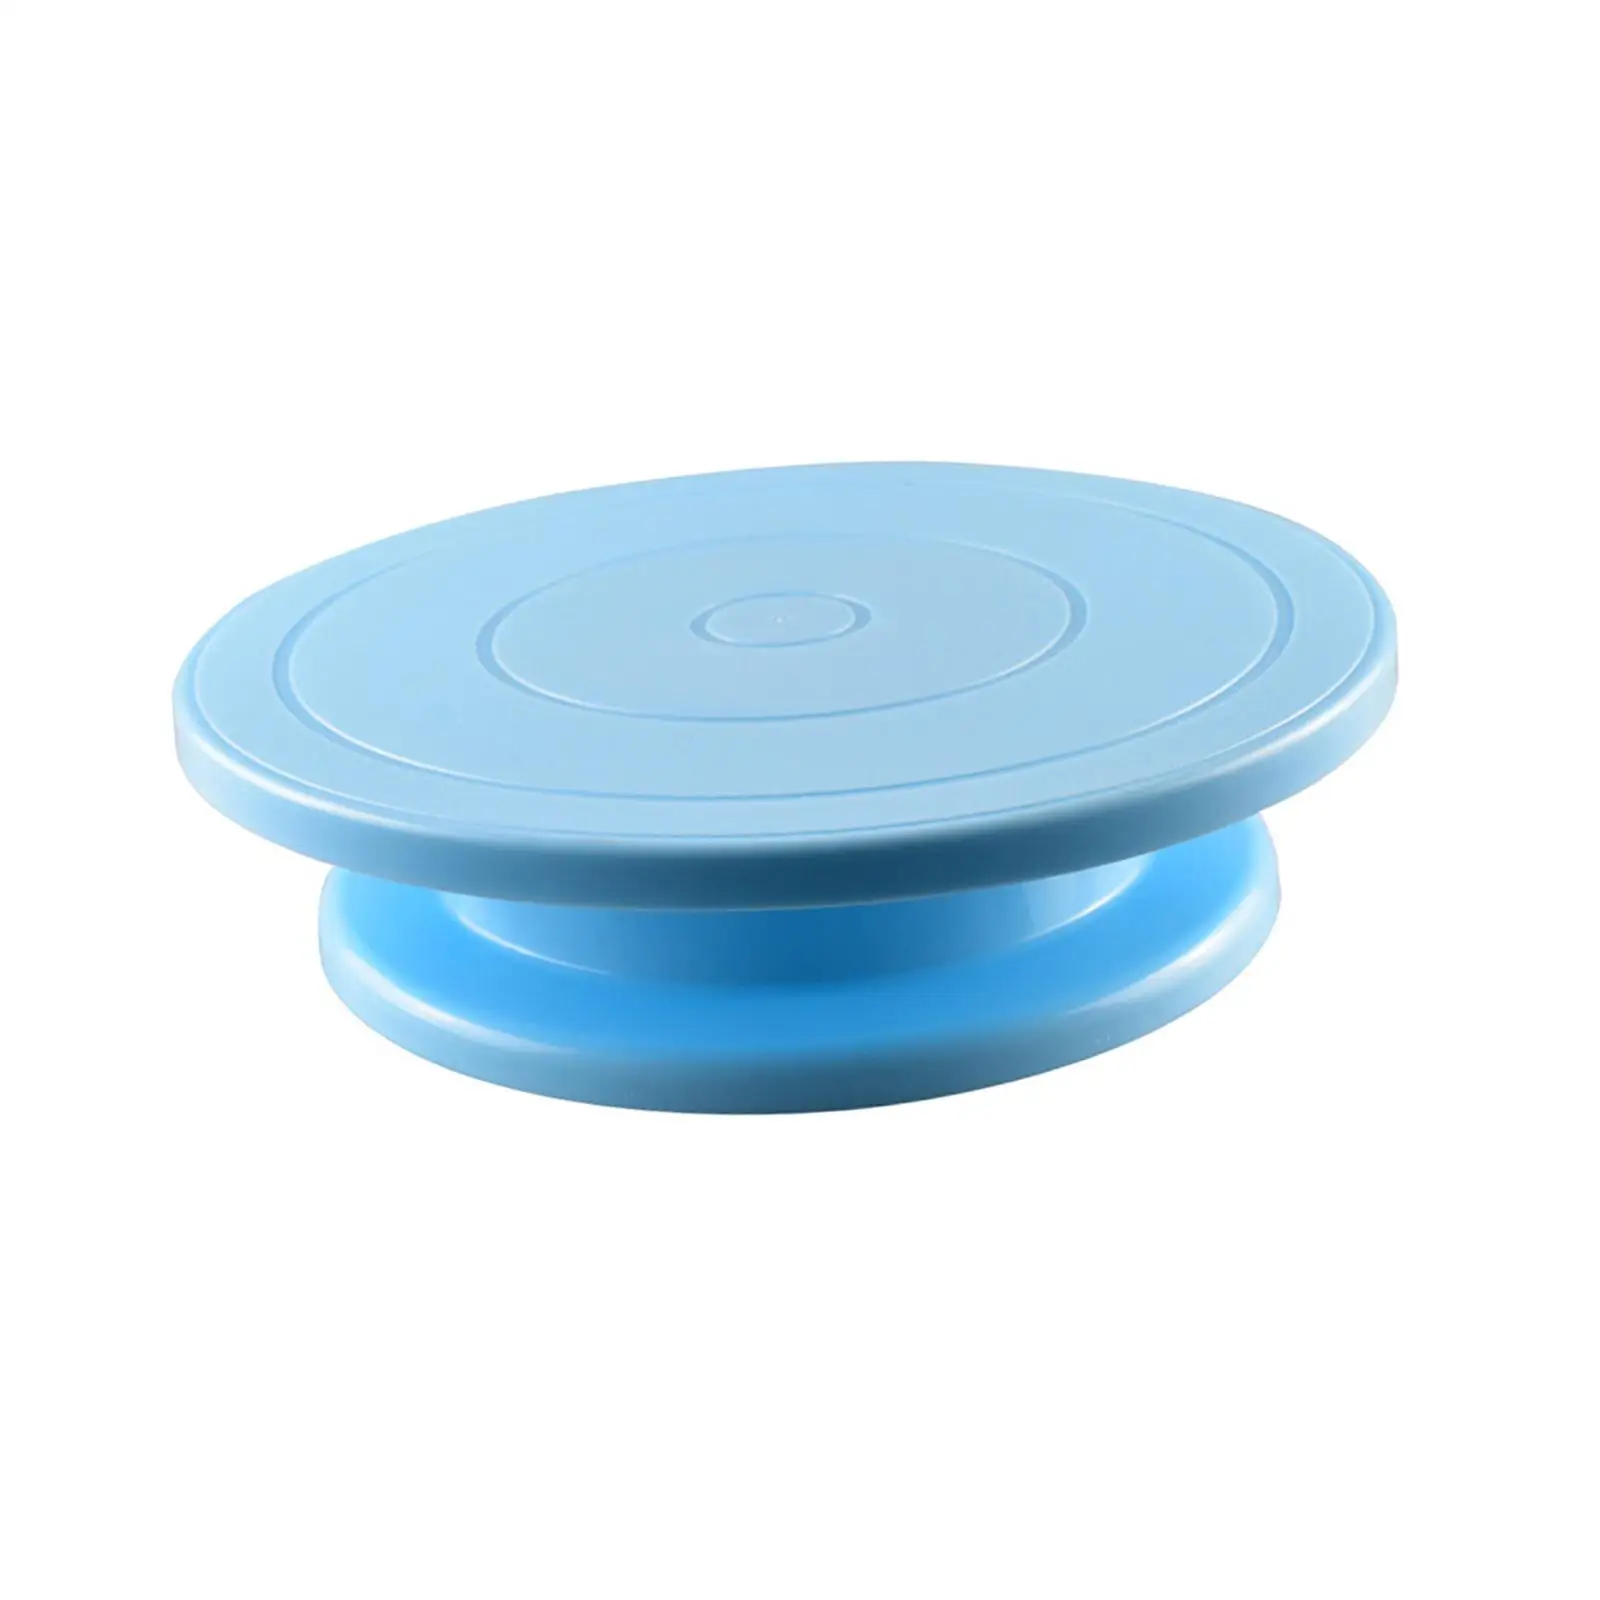 Rotating Cake Stand Easily to Clean Lightweight Round Rotating Cake Turntable